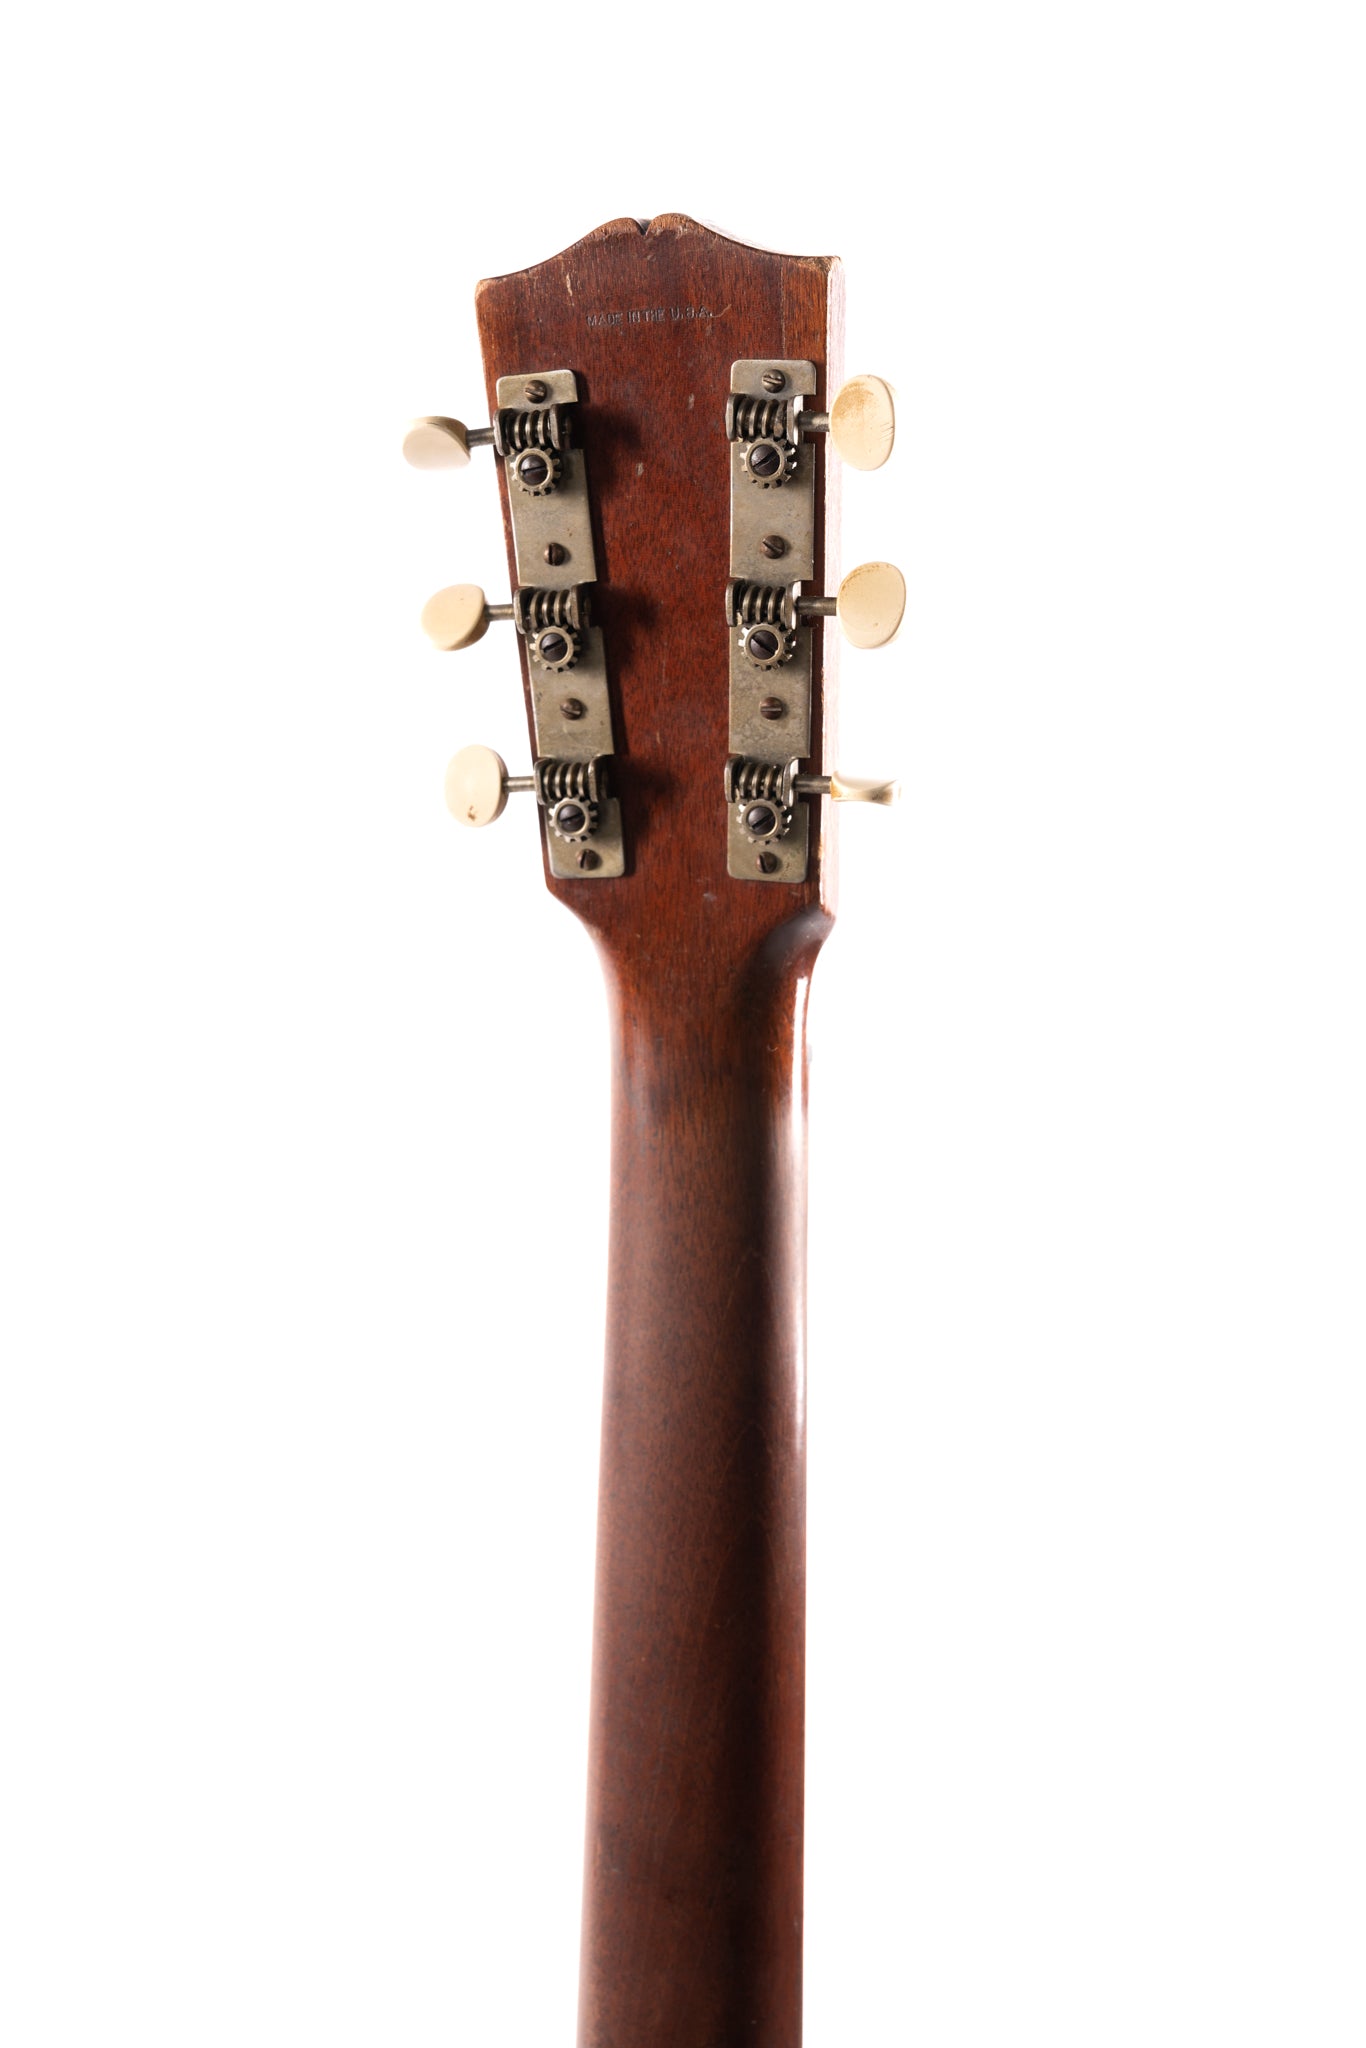 1932 Gibson L-0